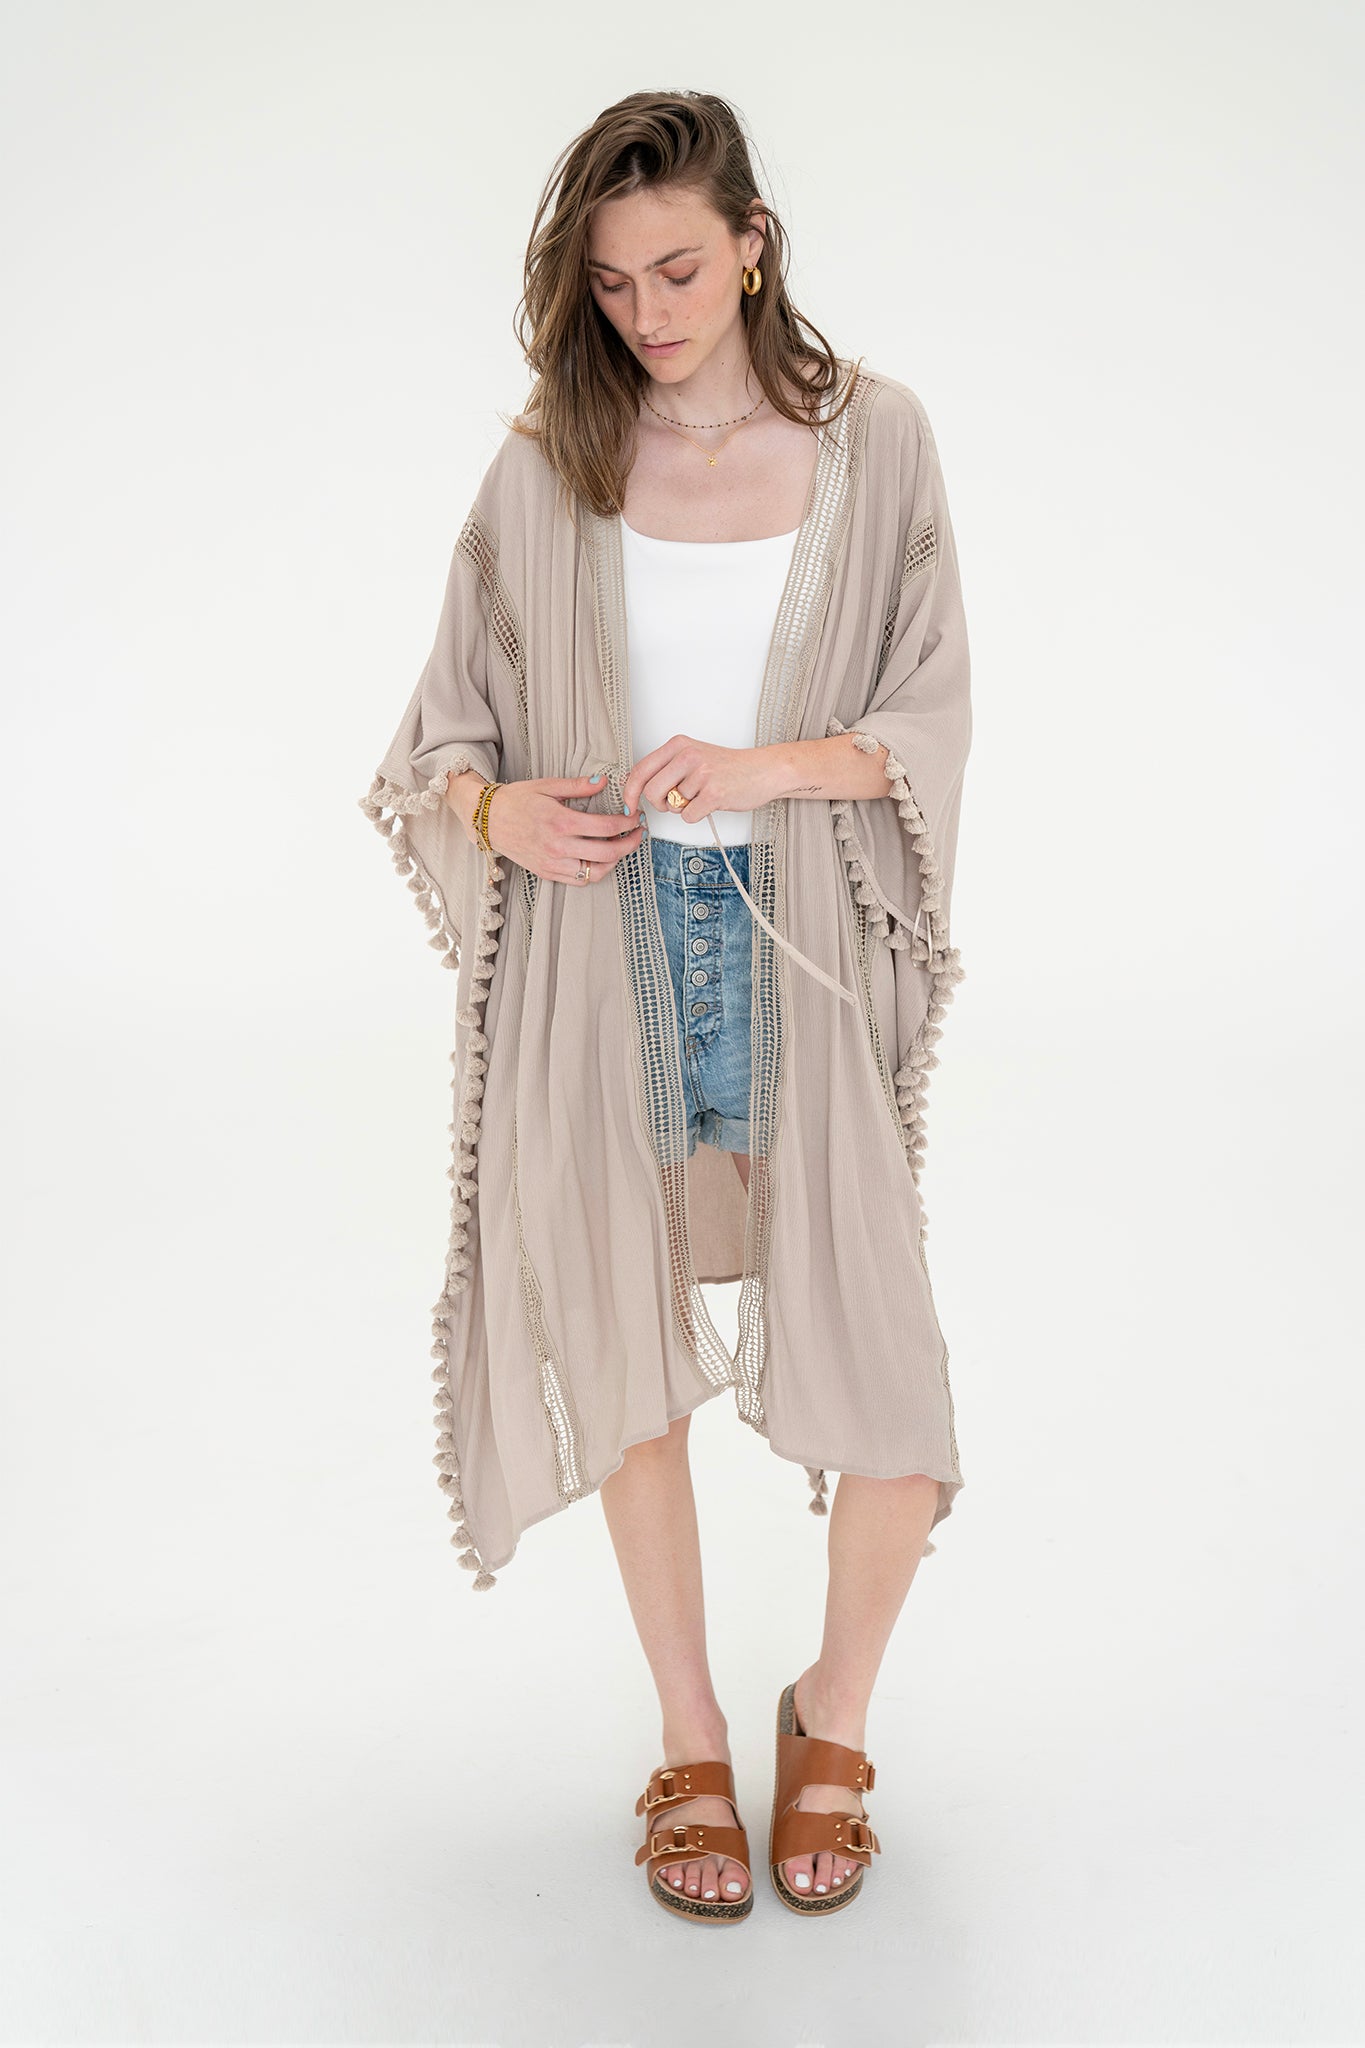 View 3 of Capistrano Tassel Fringe Duster, a Duster from Larrea Cove. Detail: .